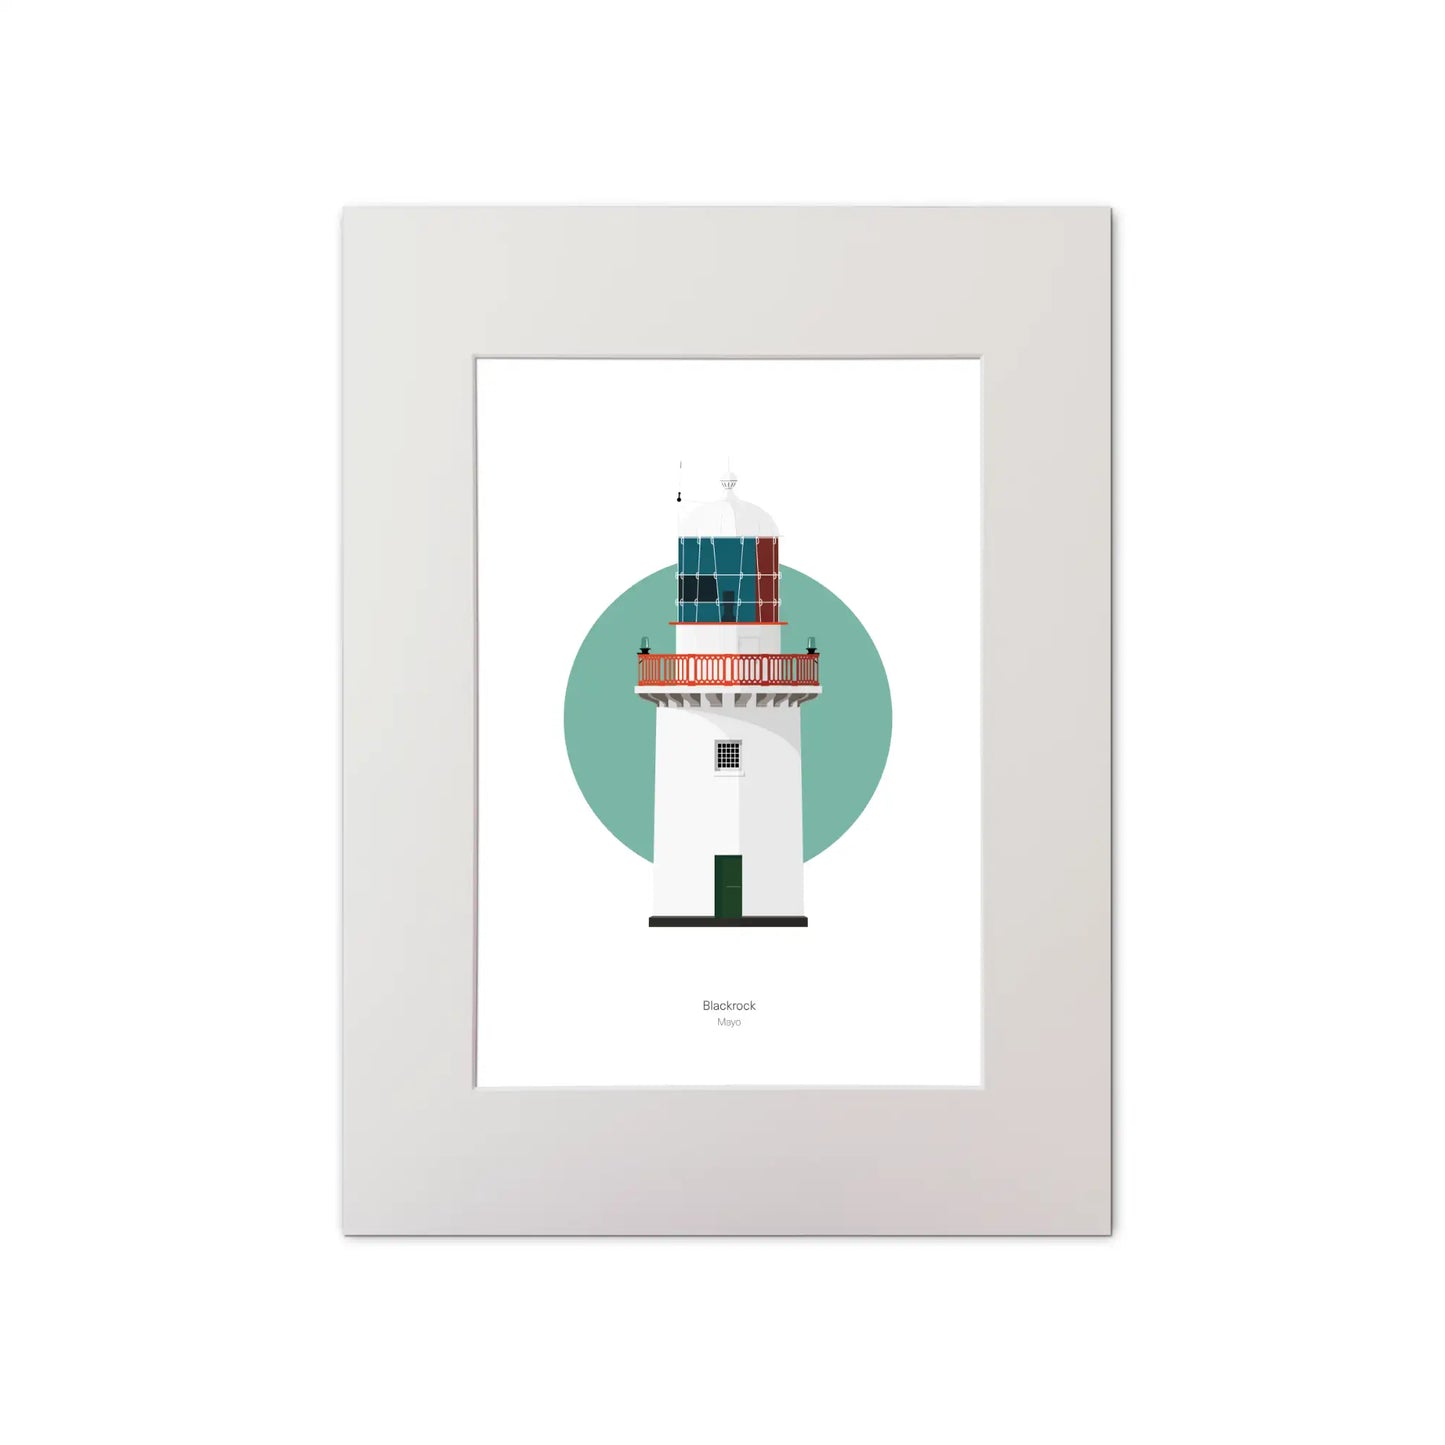 Illustration of Black Rock lighthouse on a white background inside light blue square, mounted and measuring 30x40cm.